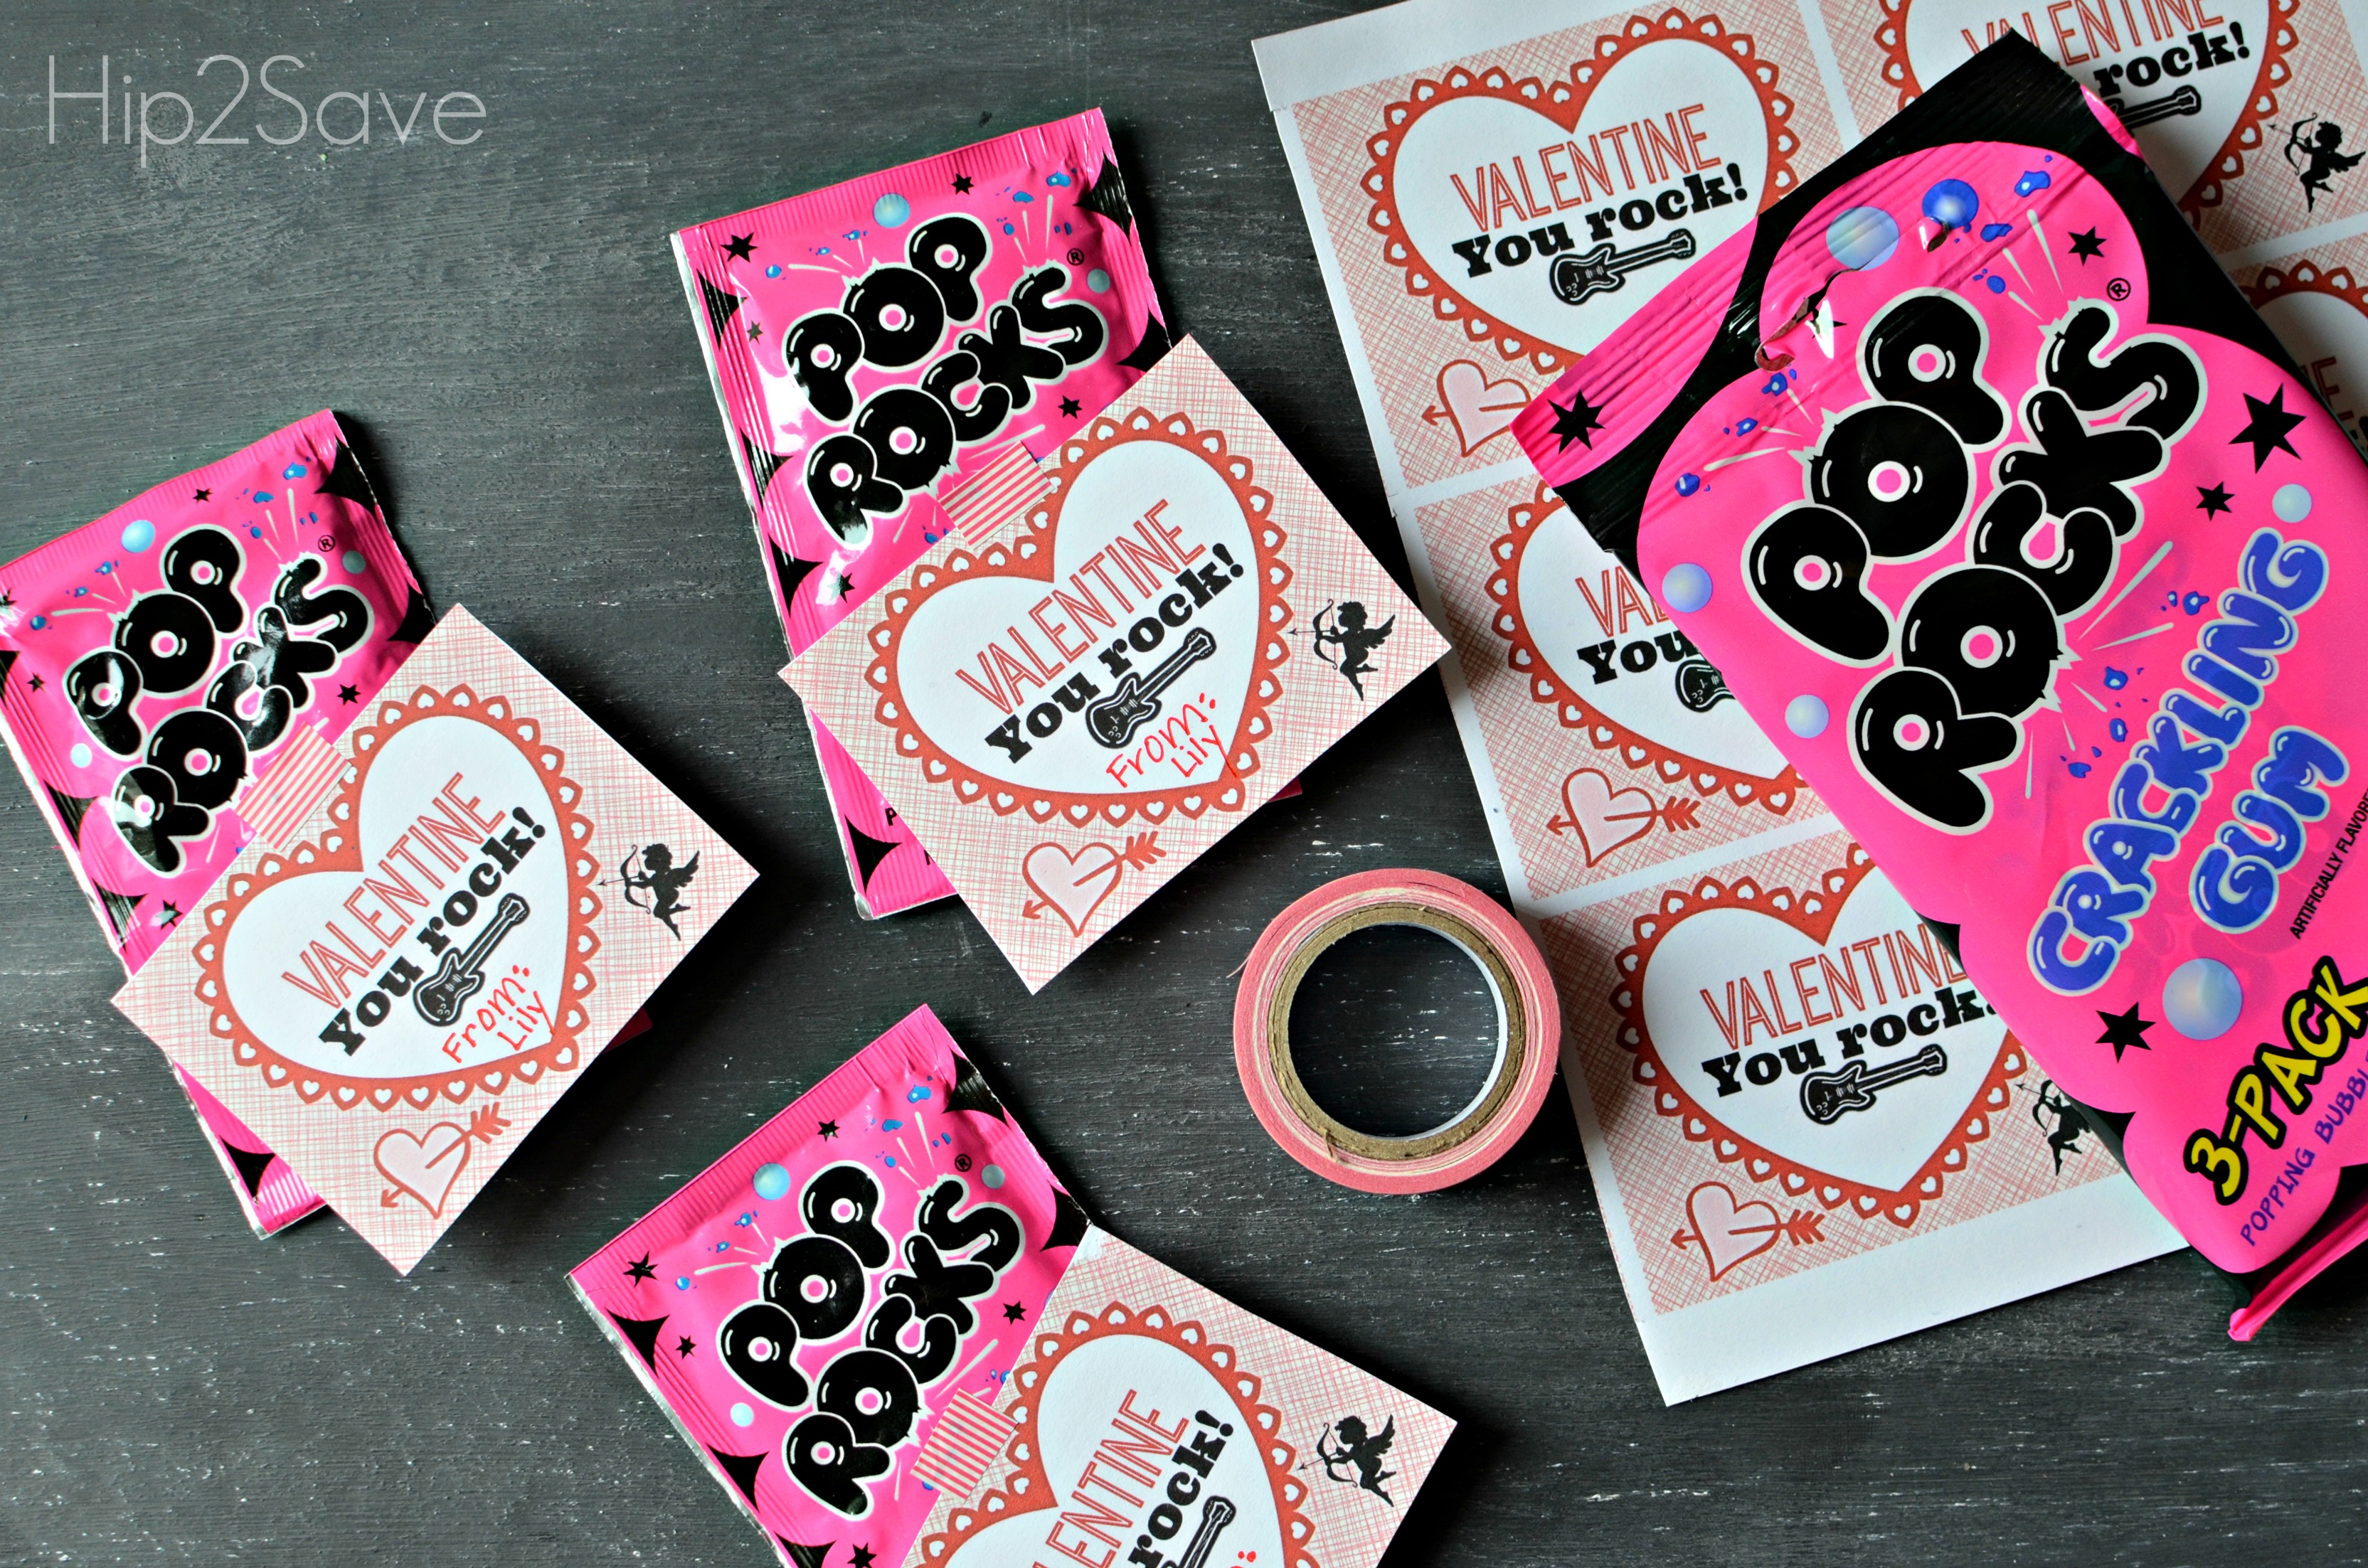 Pop Rocks Valentine S Day Cards Free Printables Easy Affordable Classroom Valentines Hip2save